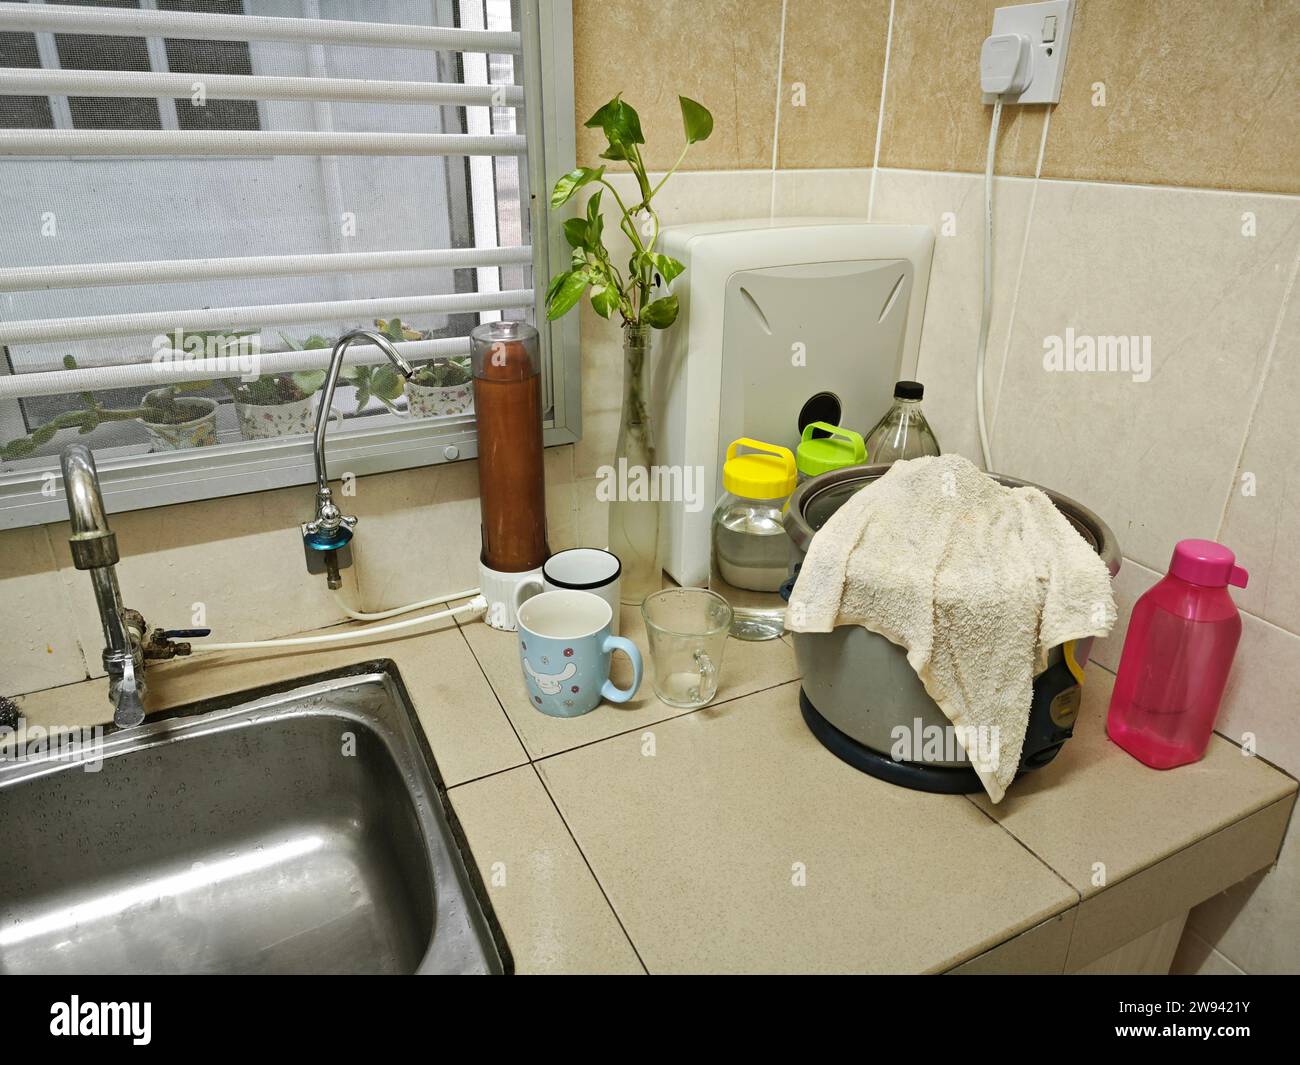 domestic water filter faucet at the kitchen basin stove Stock Photo